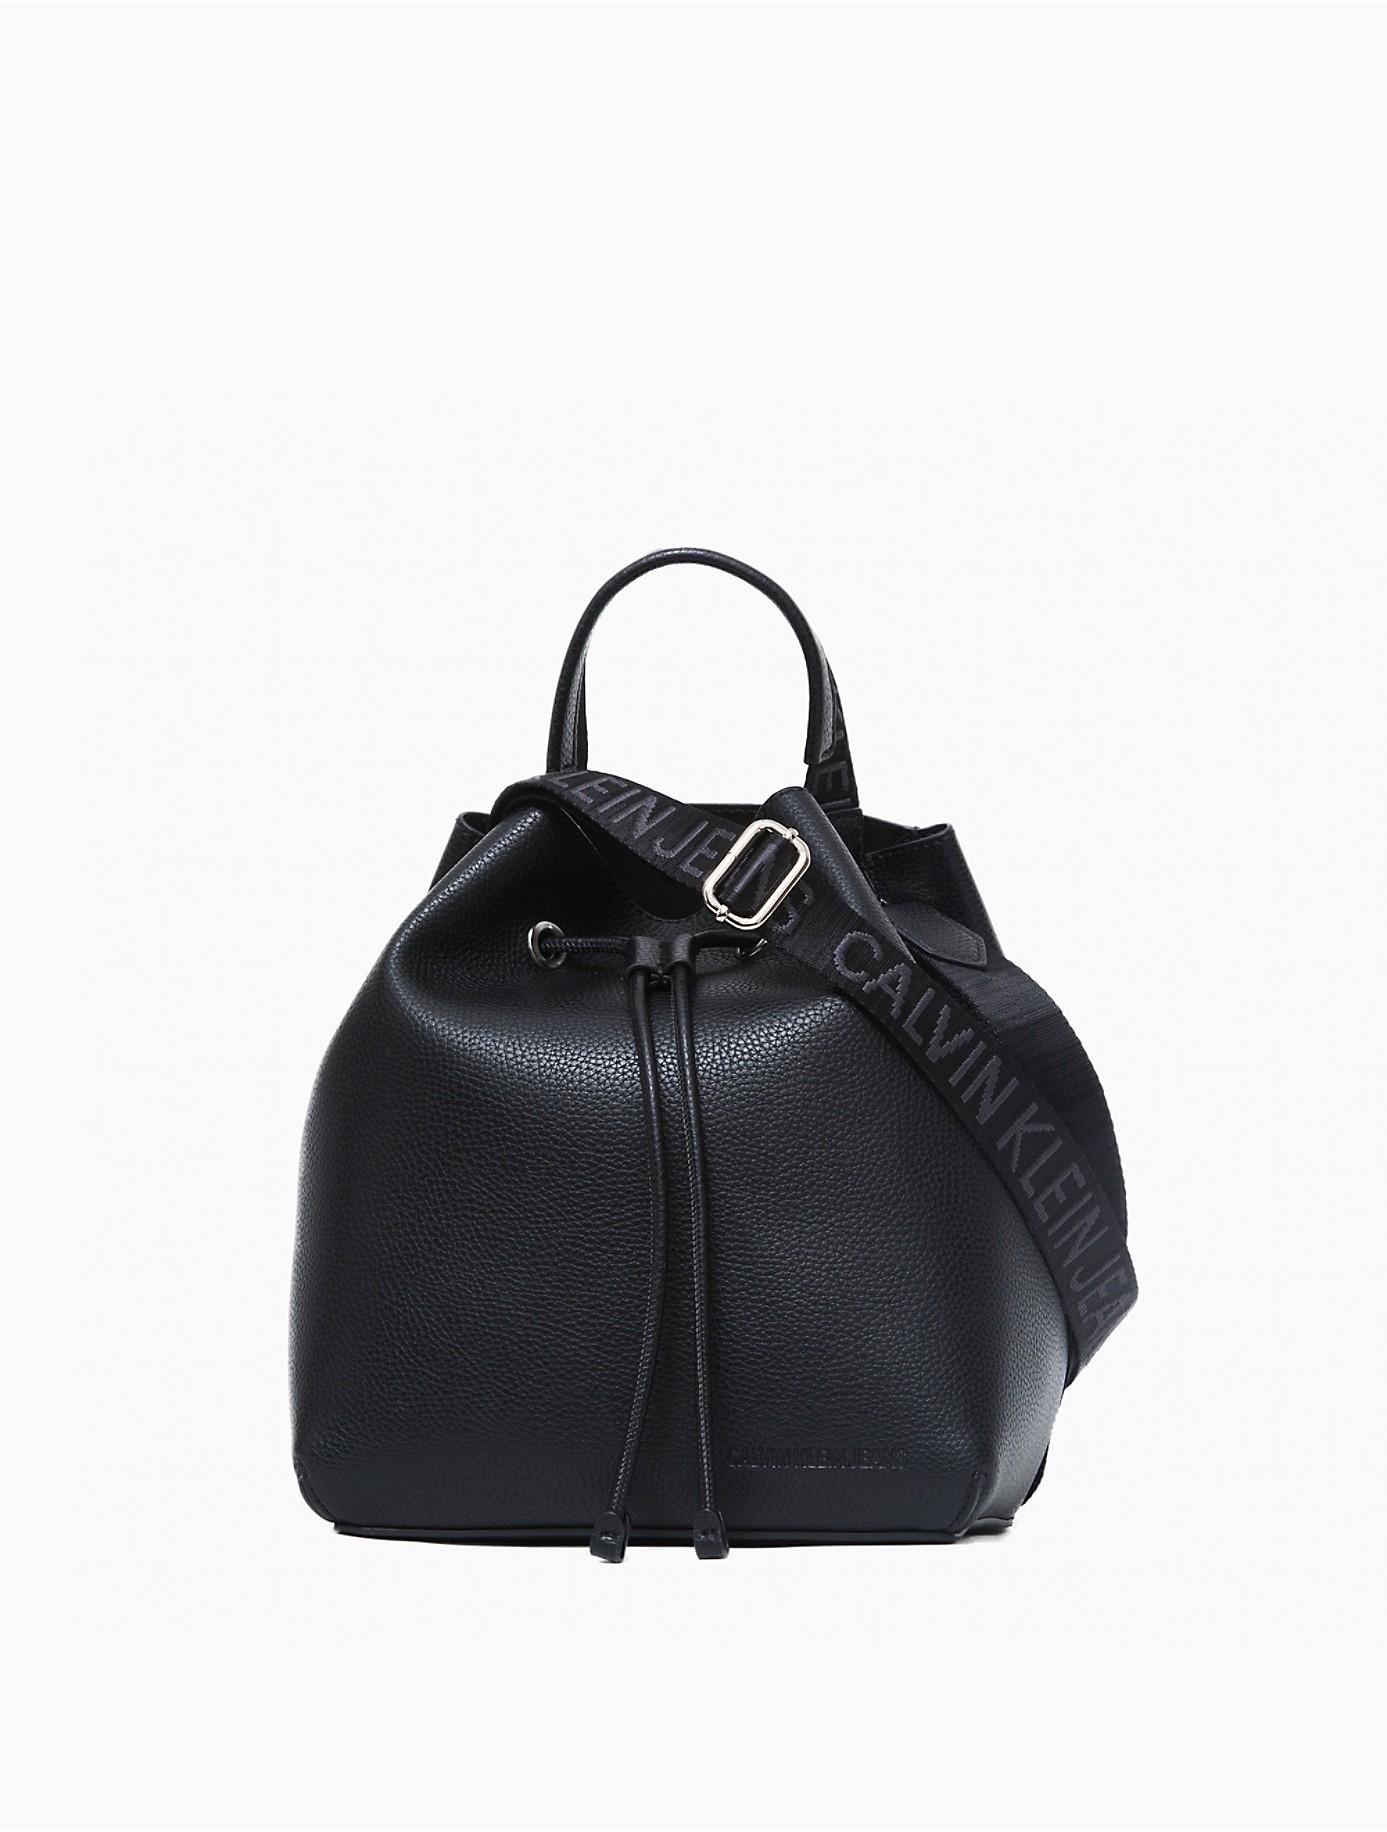 Perth knot lecture Calvin Klein Ultra Light Bucket Bag in Black | Lyst